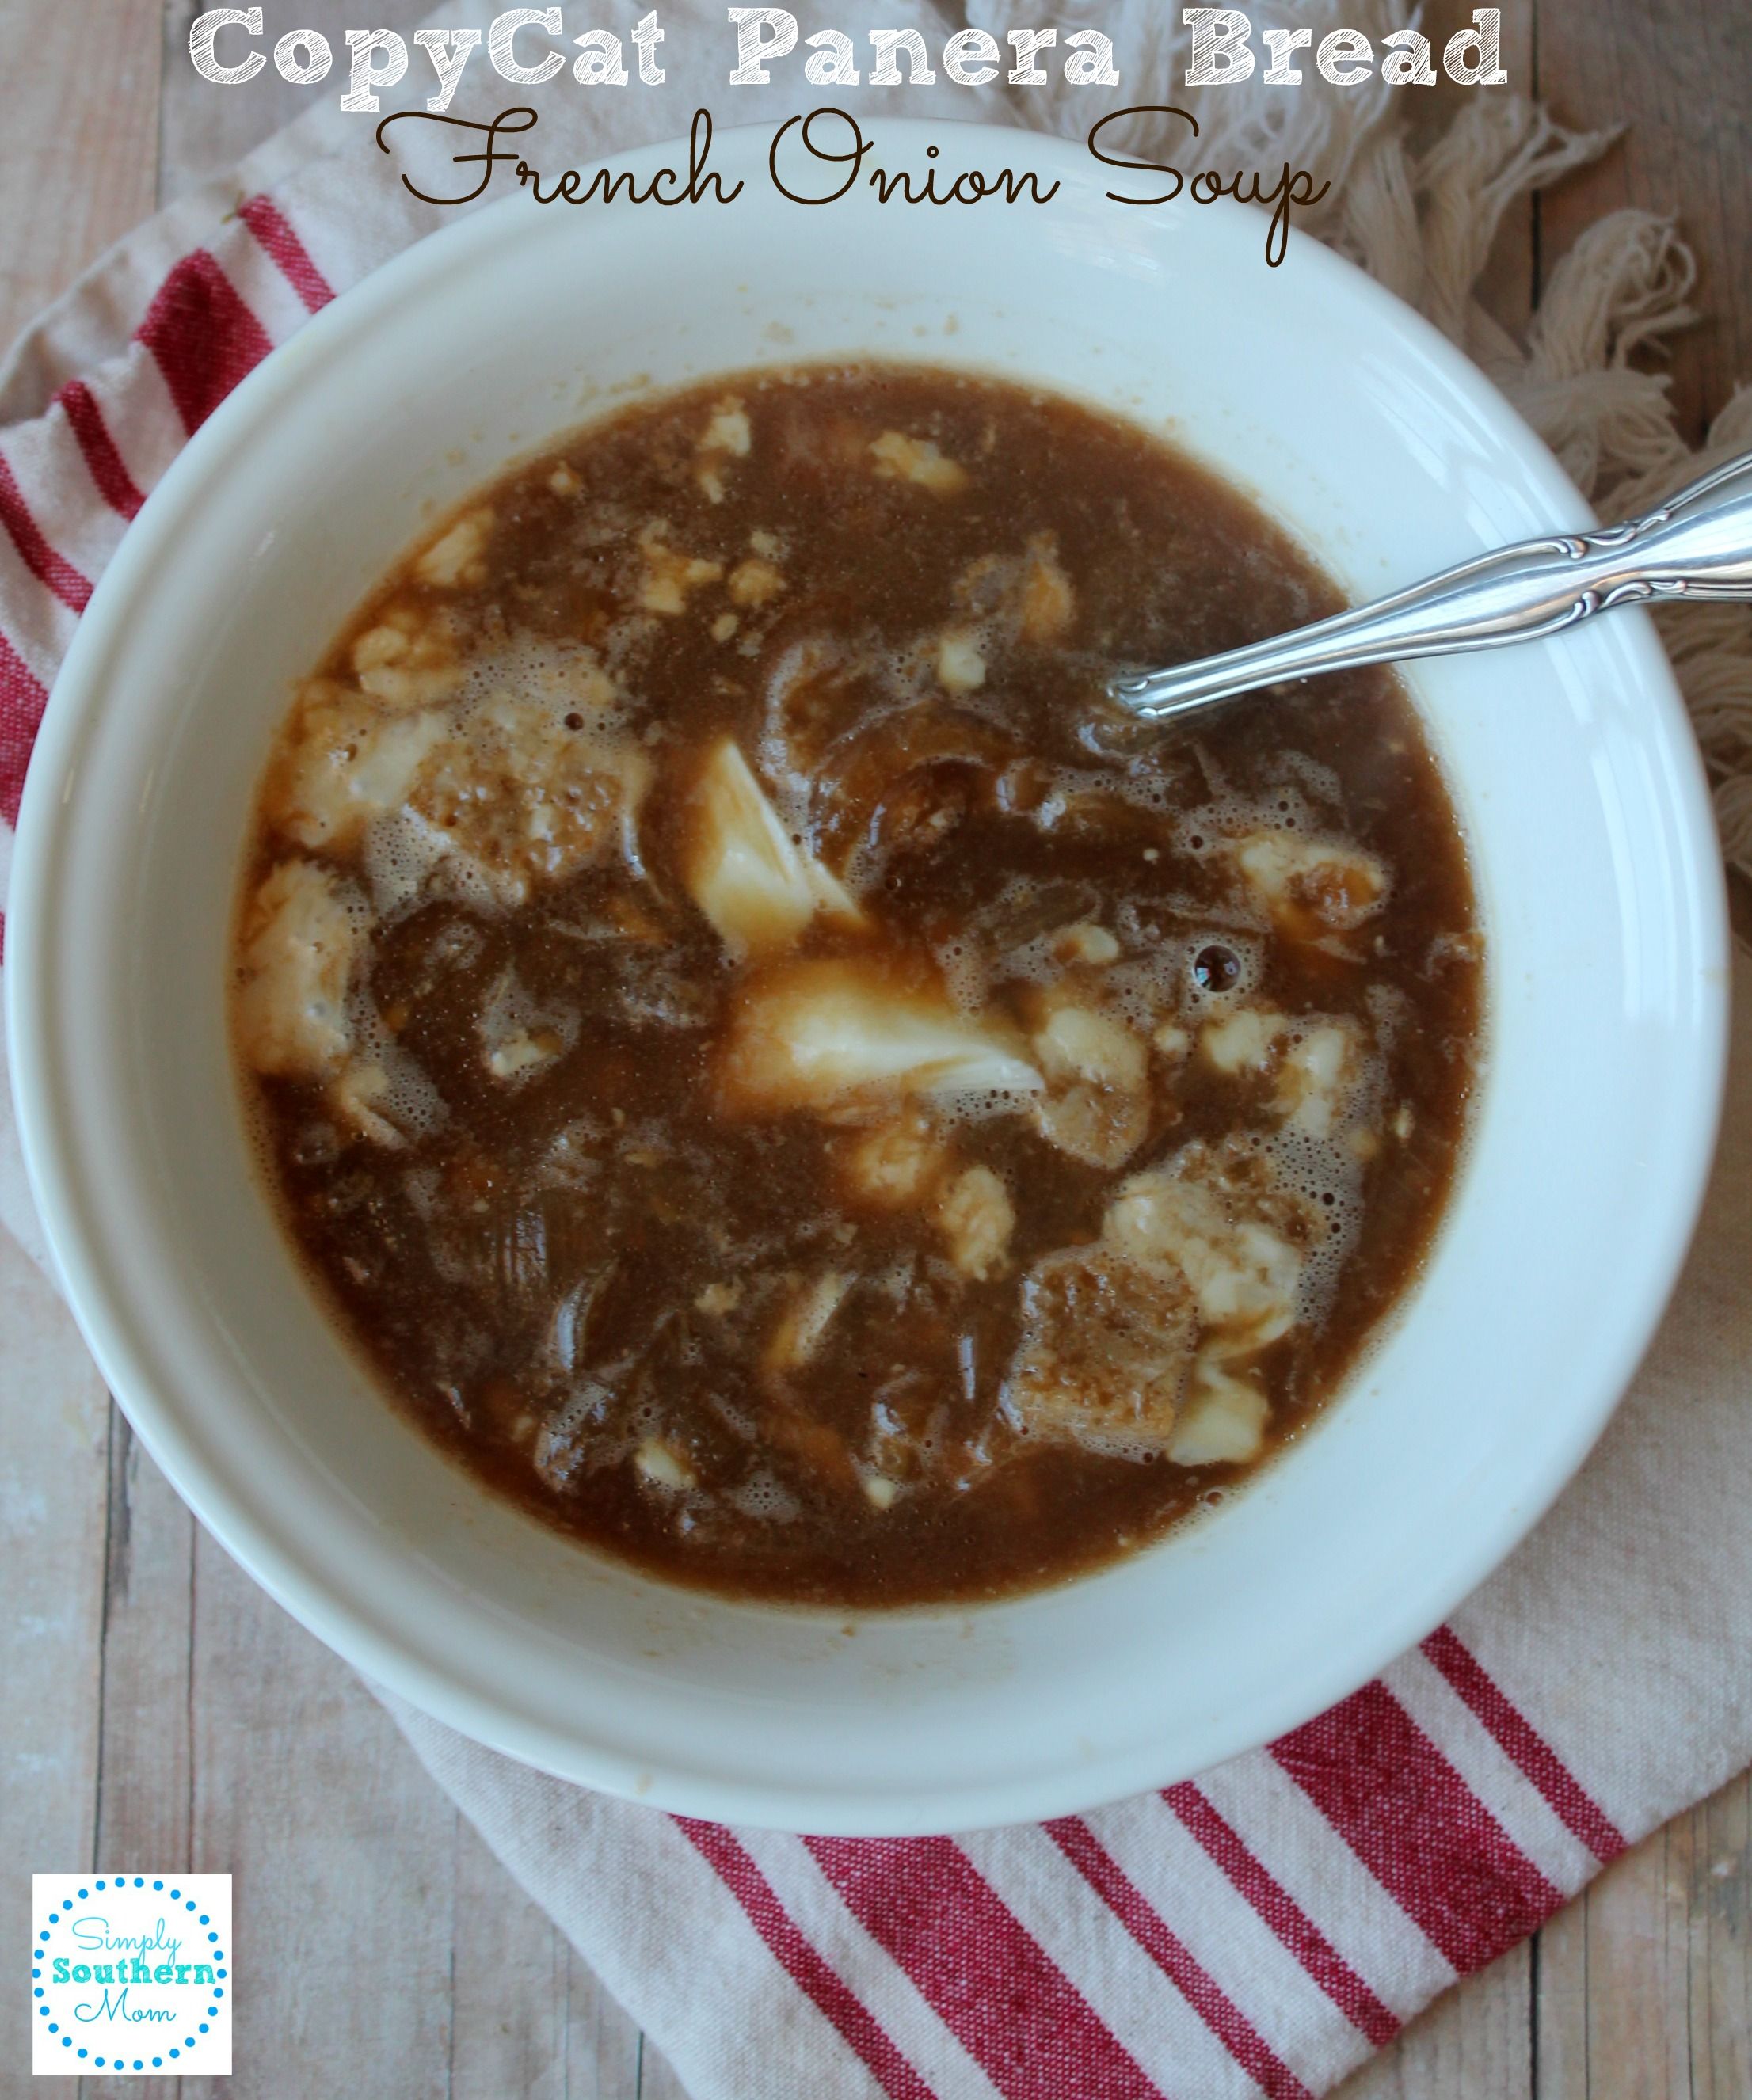 What is a good gluten-free French onion soup recipe?